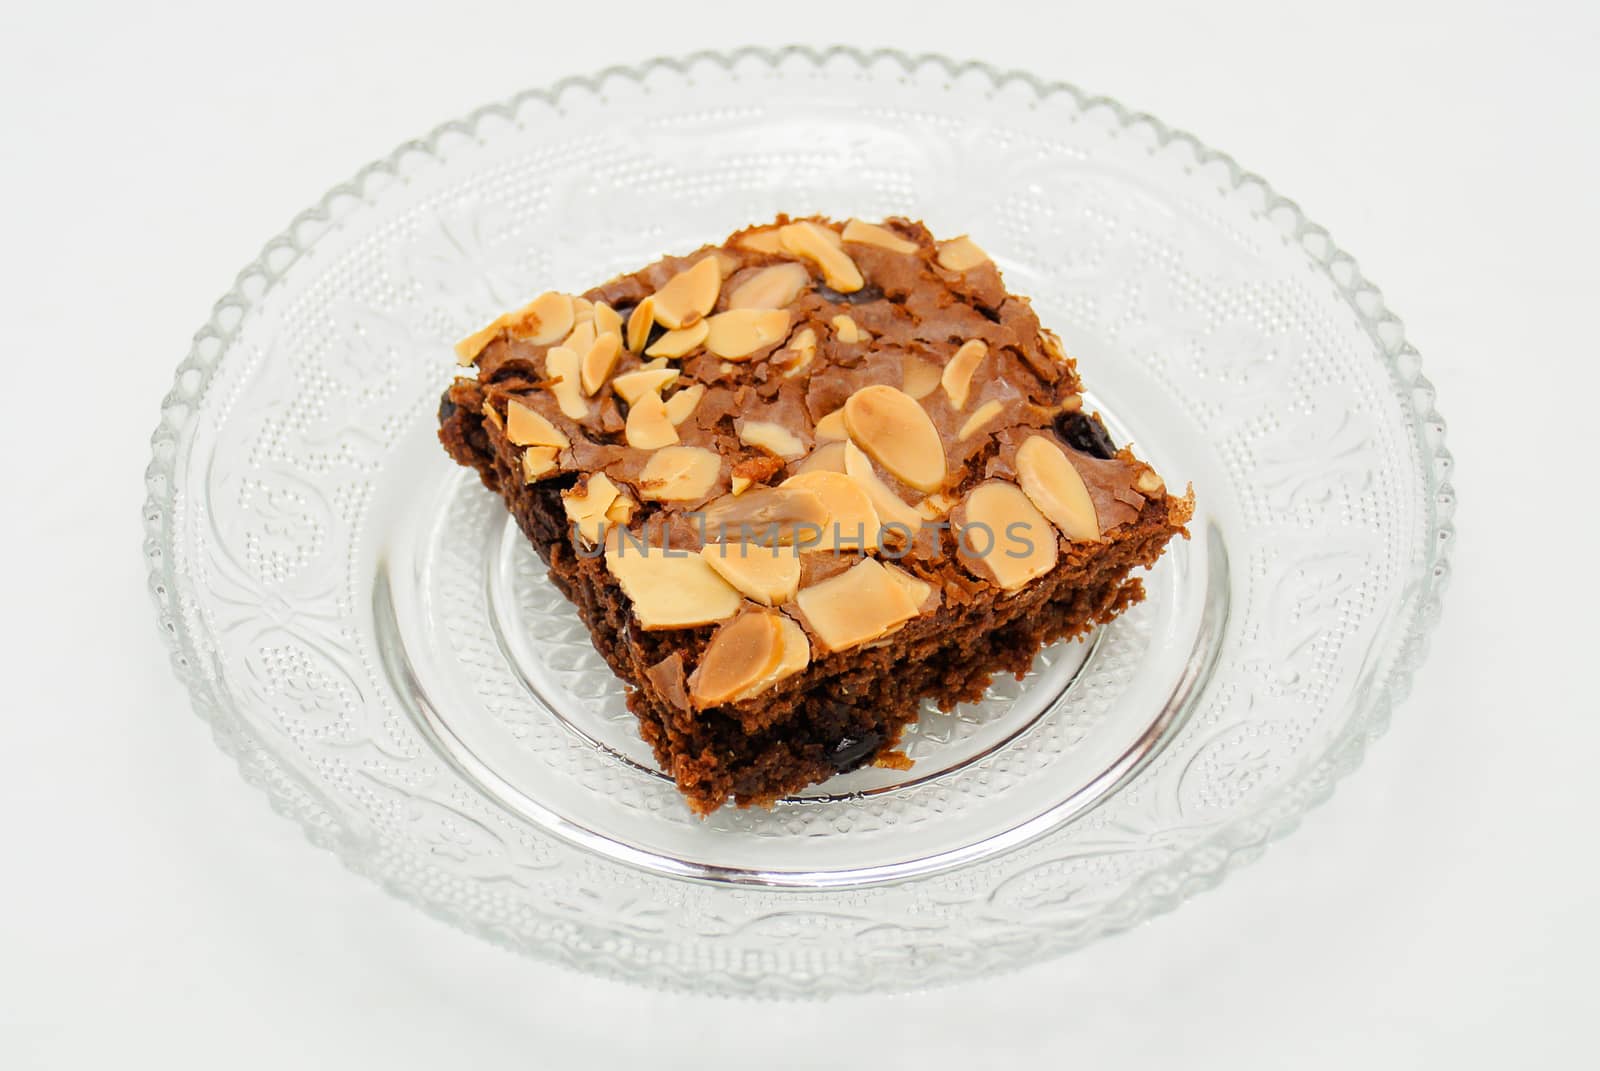 Chocolate brownie with almond topping on glass plated by yuiyuize